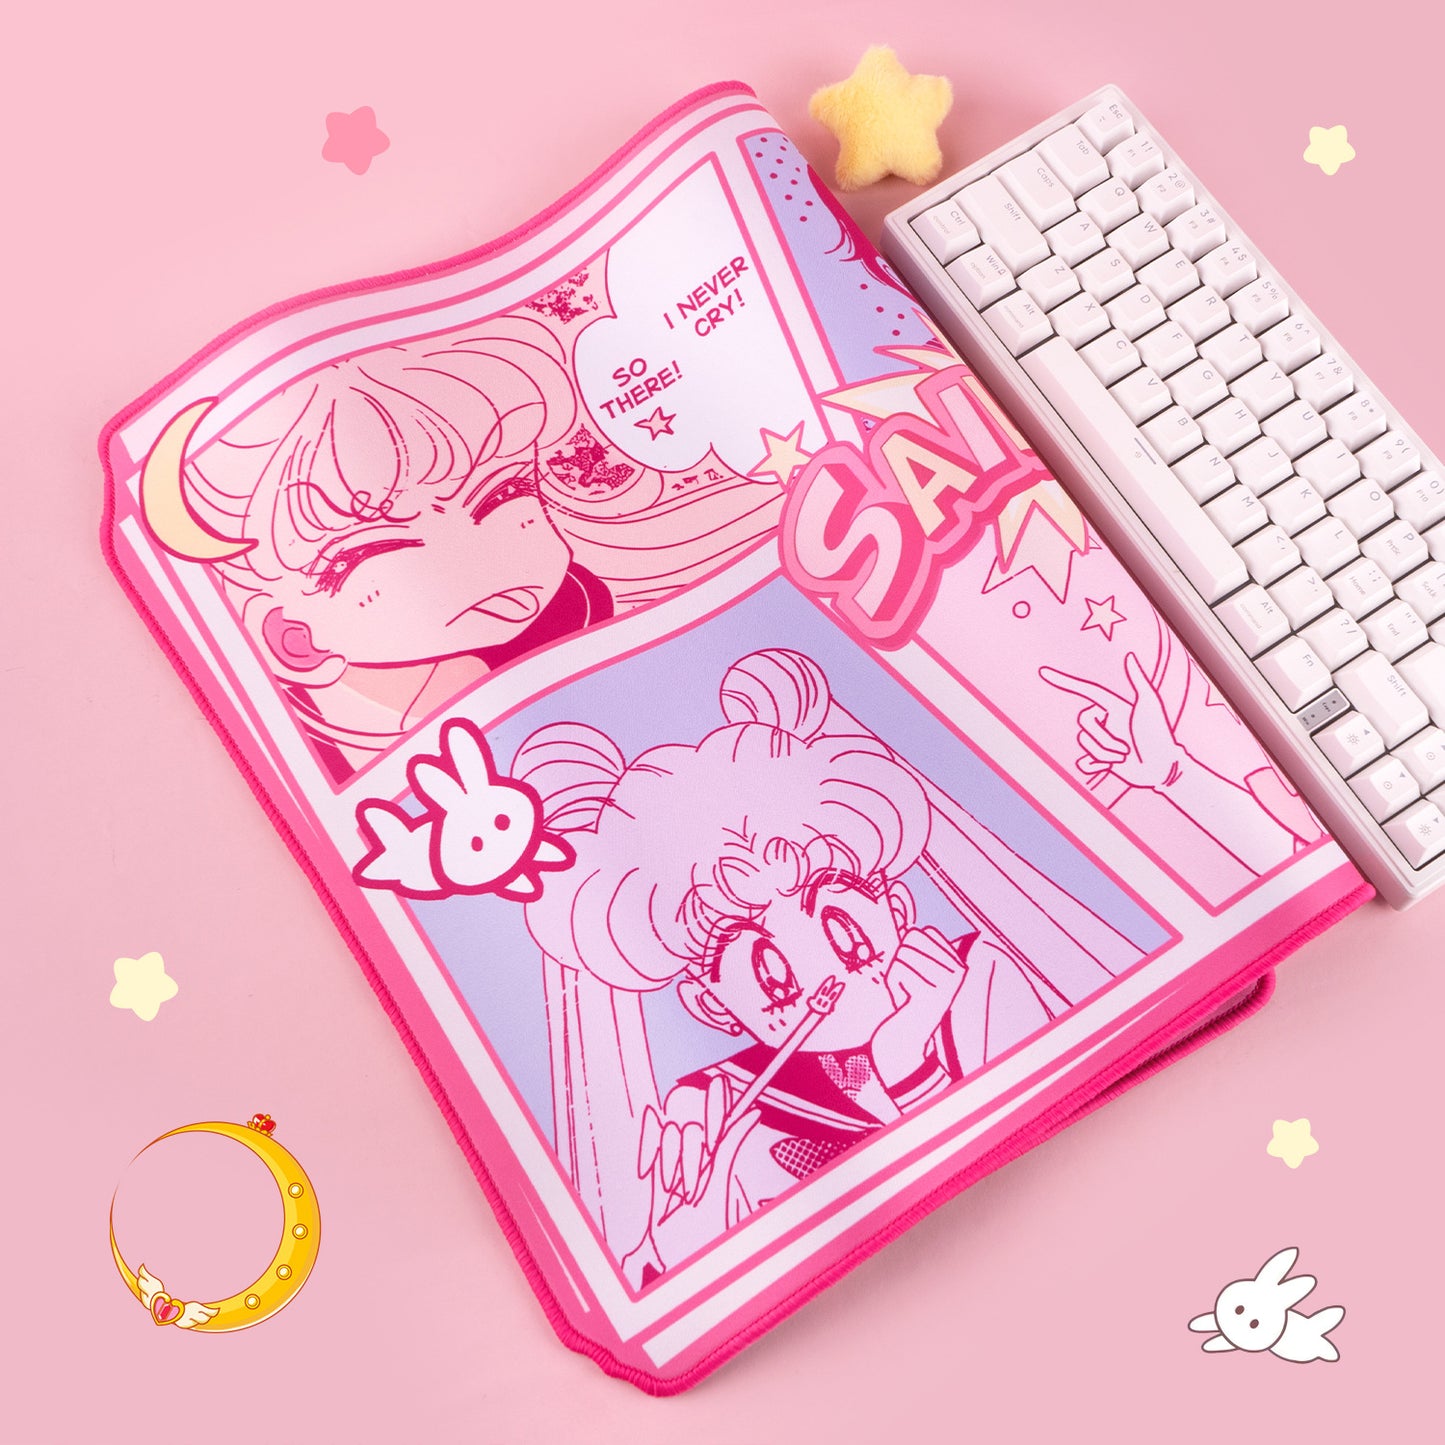 Kiloluv Sailormoon Large Mouse Pad, Cute Pink Desk Mat Protector for Office, Home, Gaming